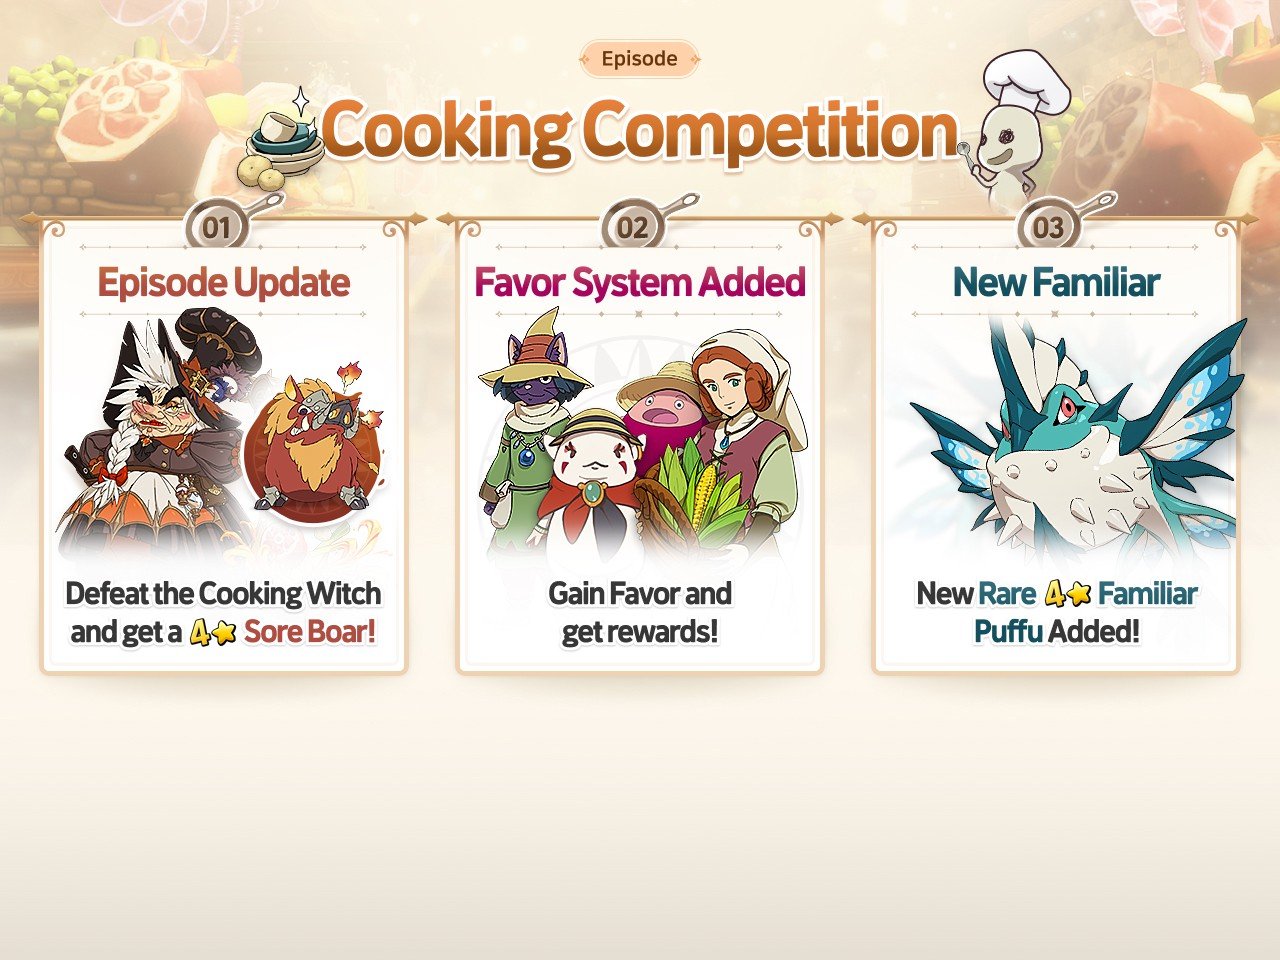 Ni No Kuni: Cross Worlds Reveals Cooking Competition Episode in their Latest Update